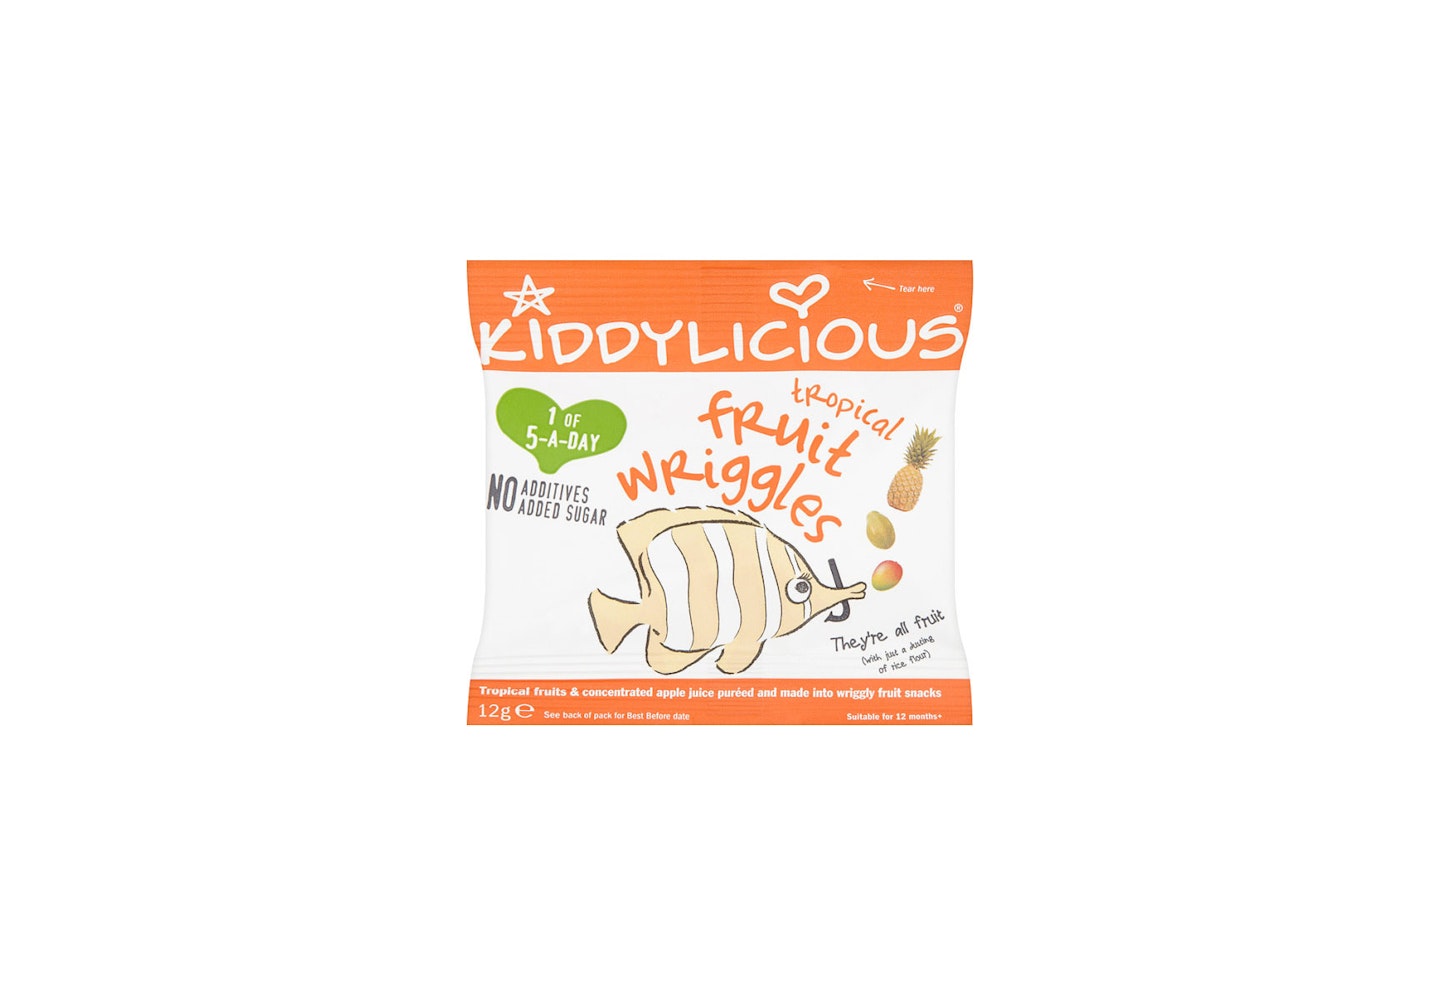 Kiddylicious Banana Wafers - Gluten and Dairy Free Kids Snack - Suitable  for 6+ Months - 4 x 10 Twin Packs : : Grocery